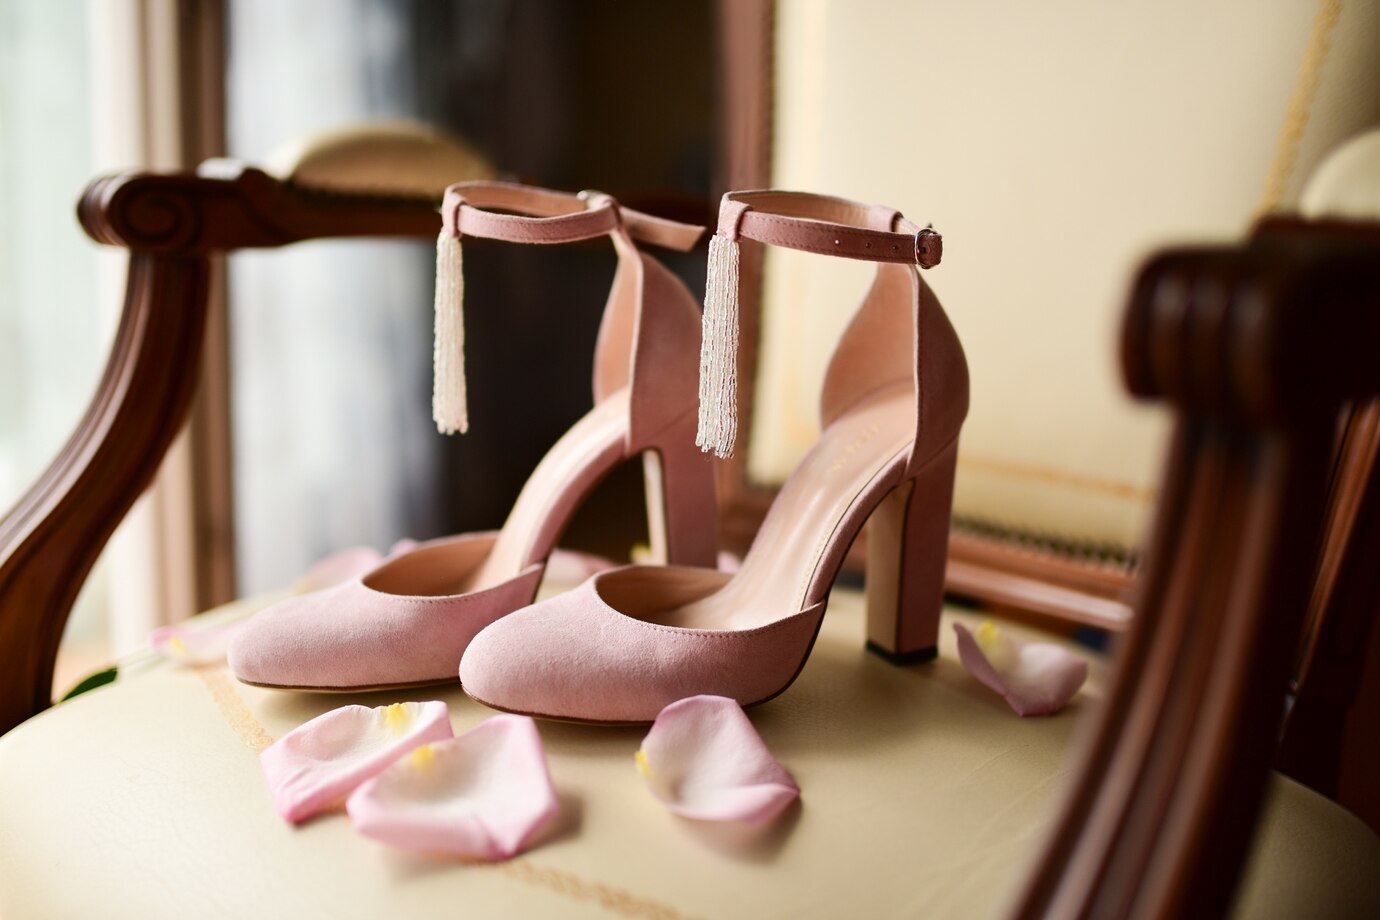 pink-bride-s-shoes-stand-chair-with-pink-rose-petals_8353-7364.jpg